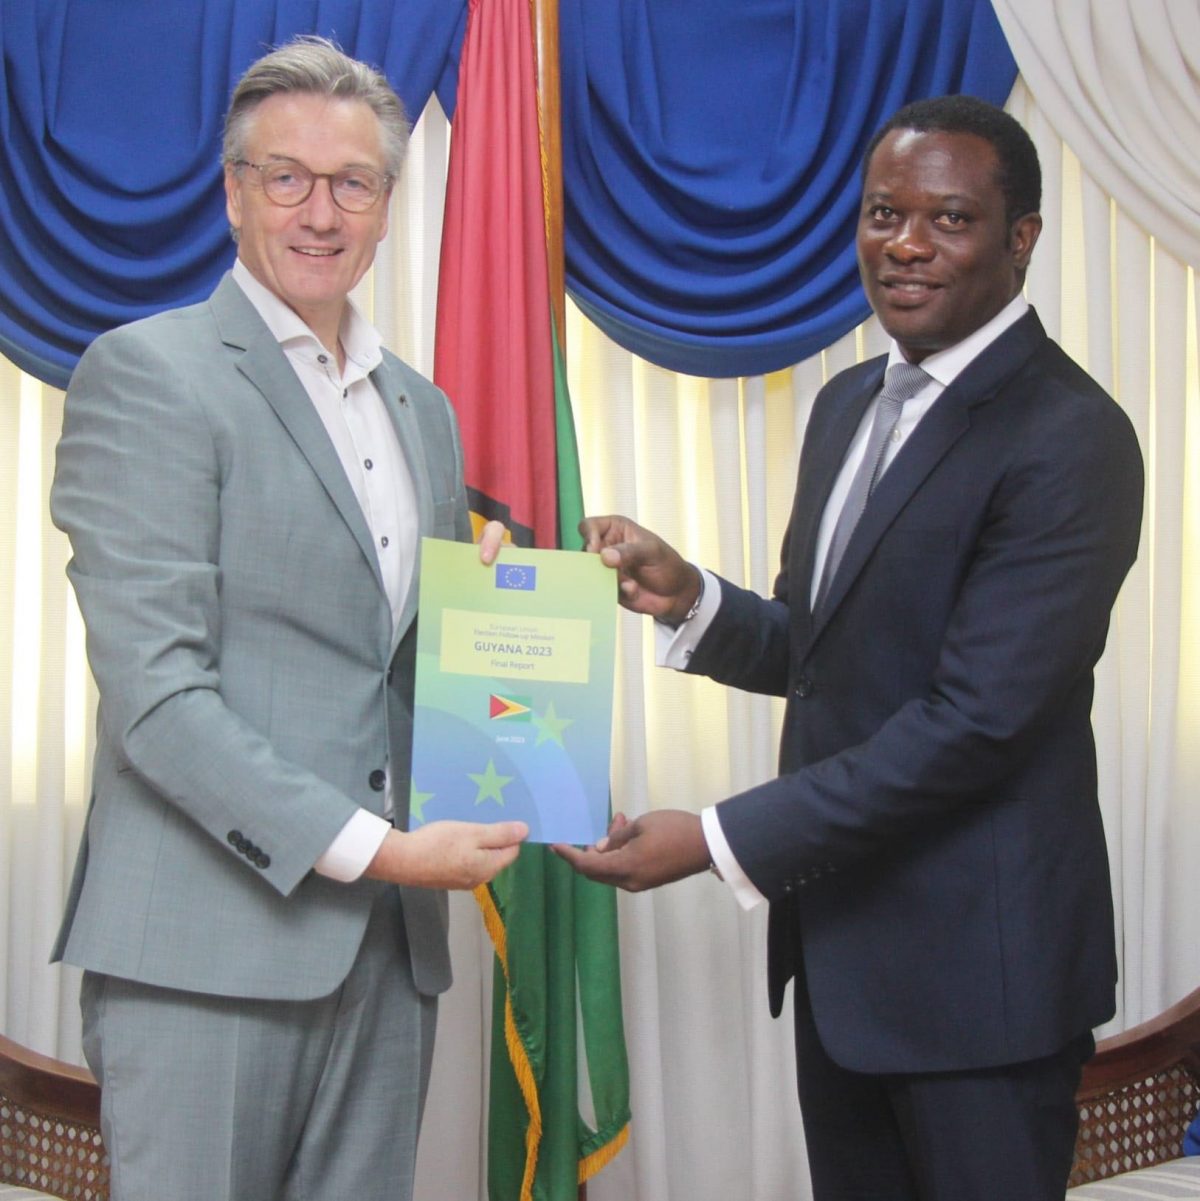 René van Nes (left), Ambassador of the European Union to Guyana handing over the report to Minister of Foreign Affairs and International Cooperation, Hugh Todd
